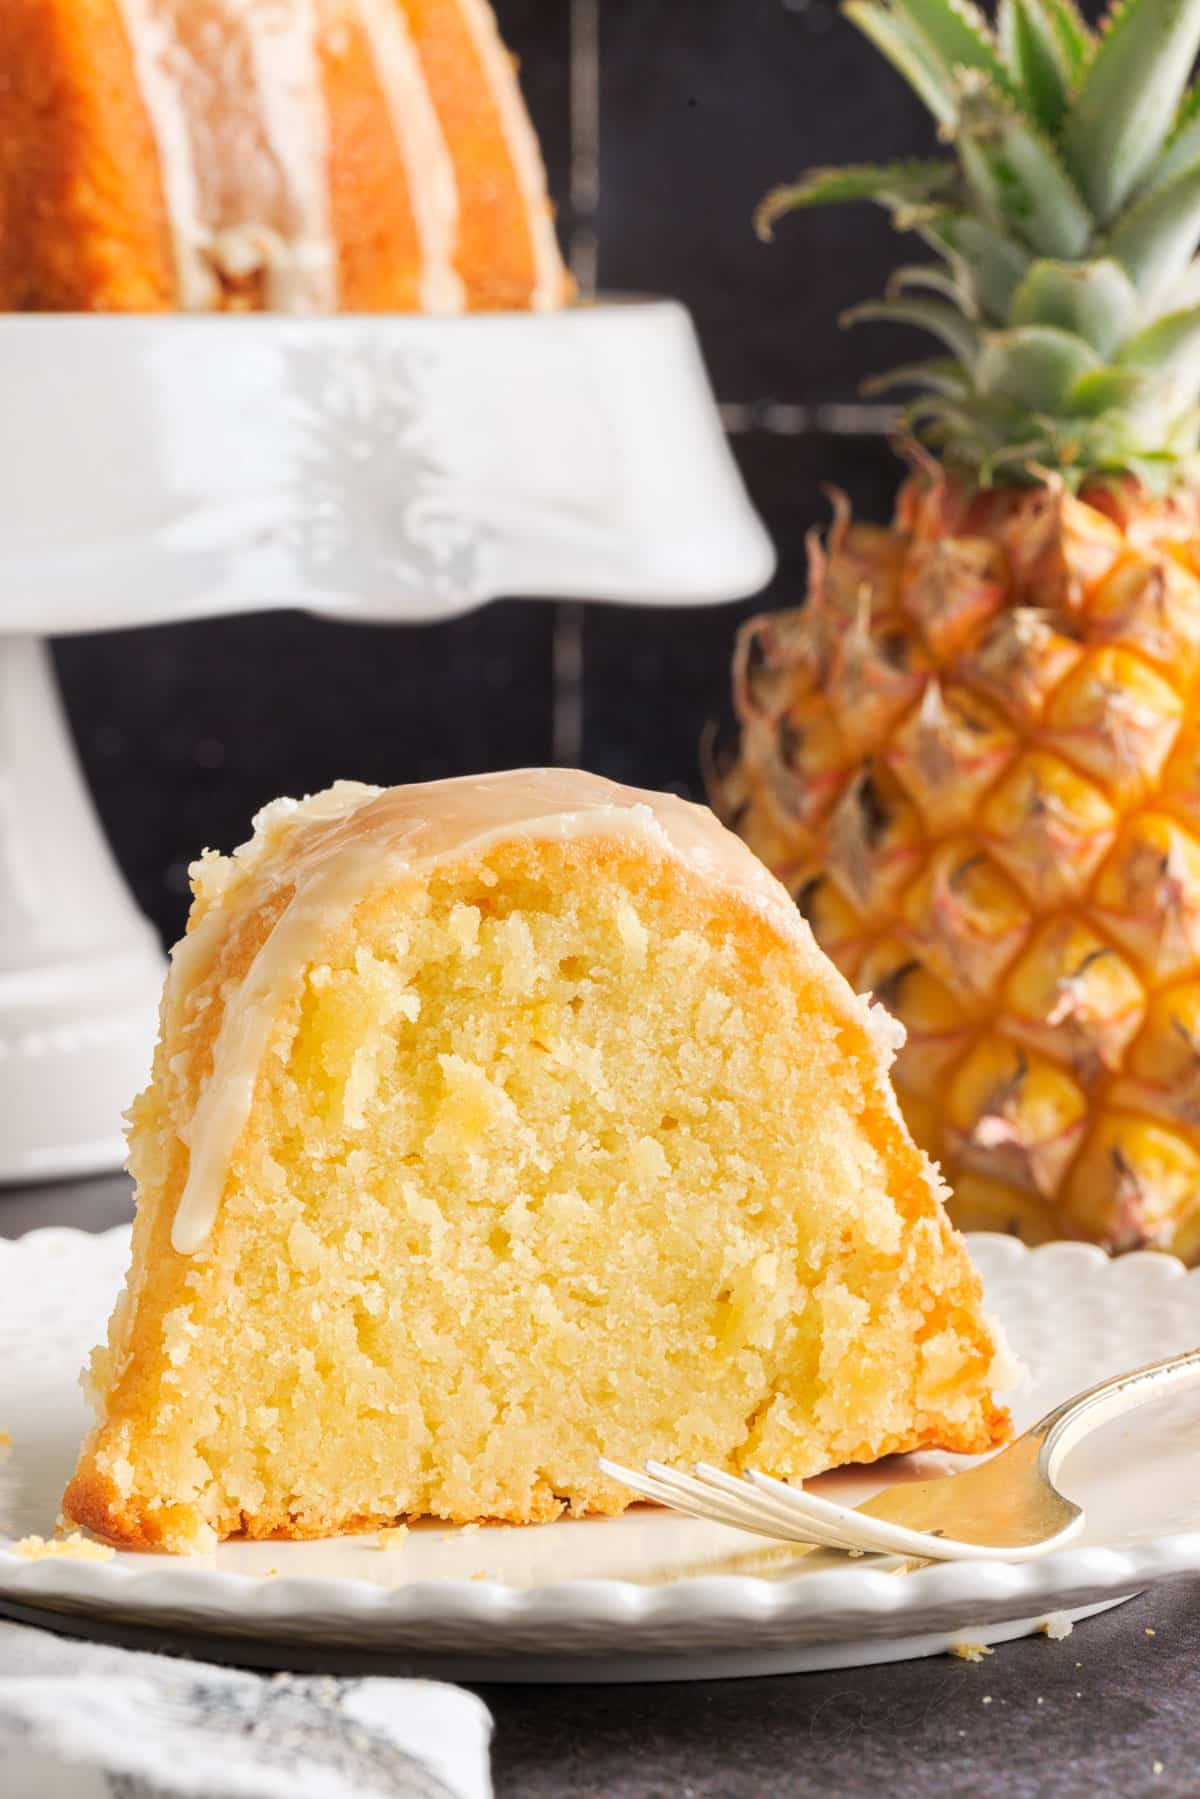 A slice of Pineapple Pound Cake on a small white dish with a fork a pineapple in the background.